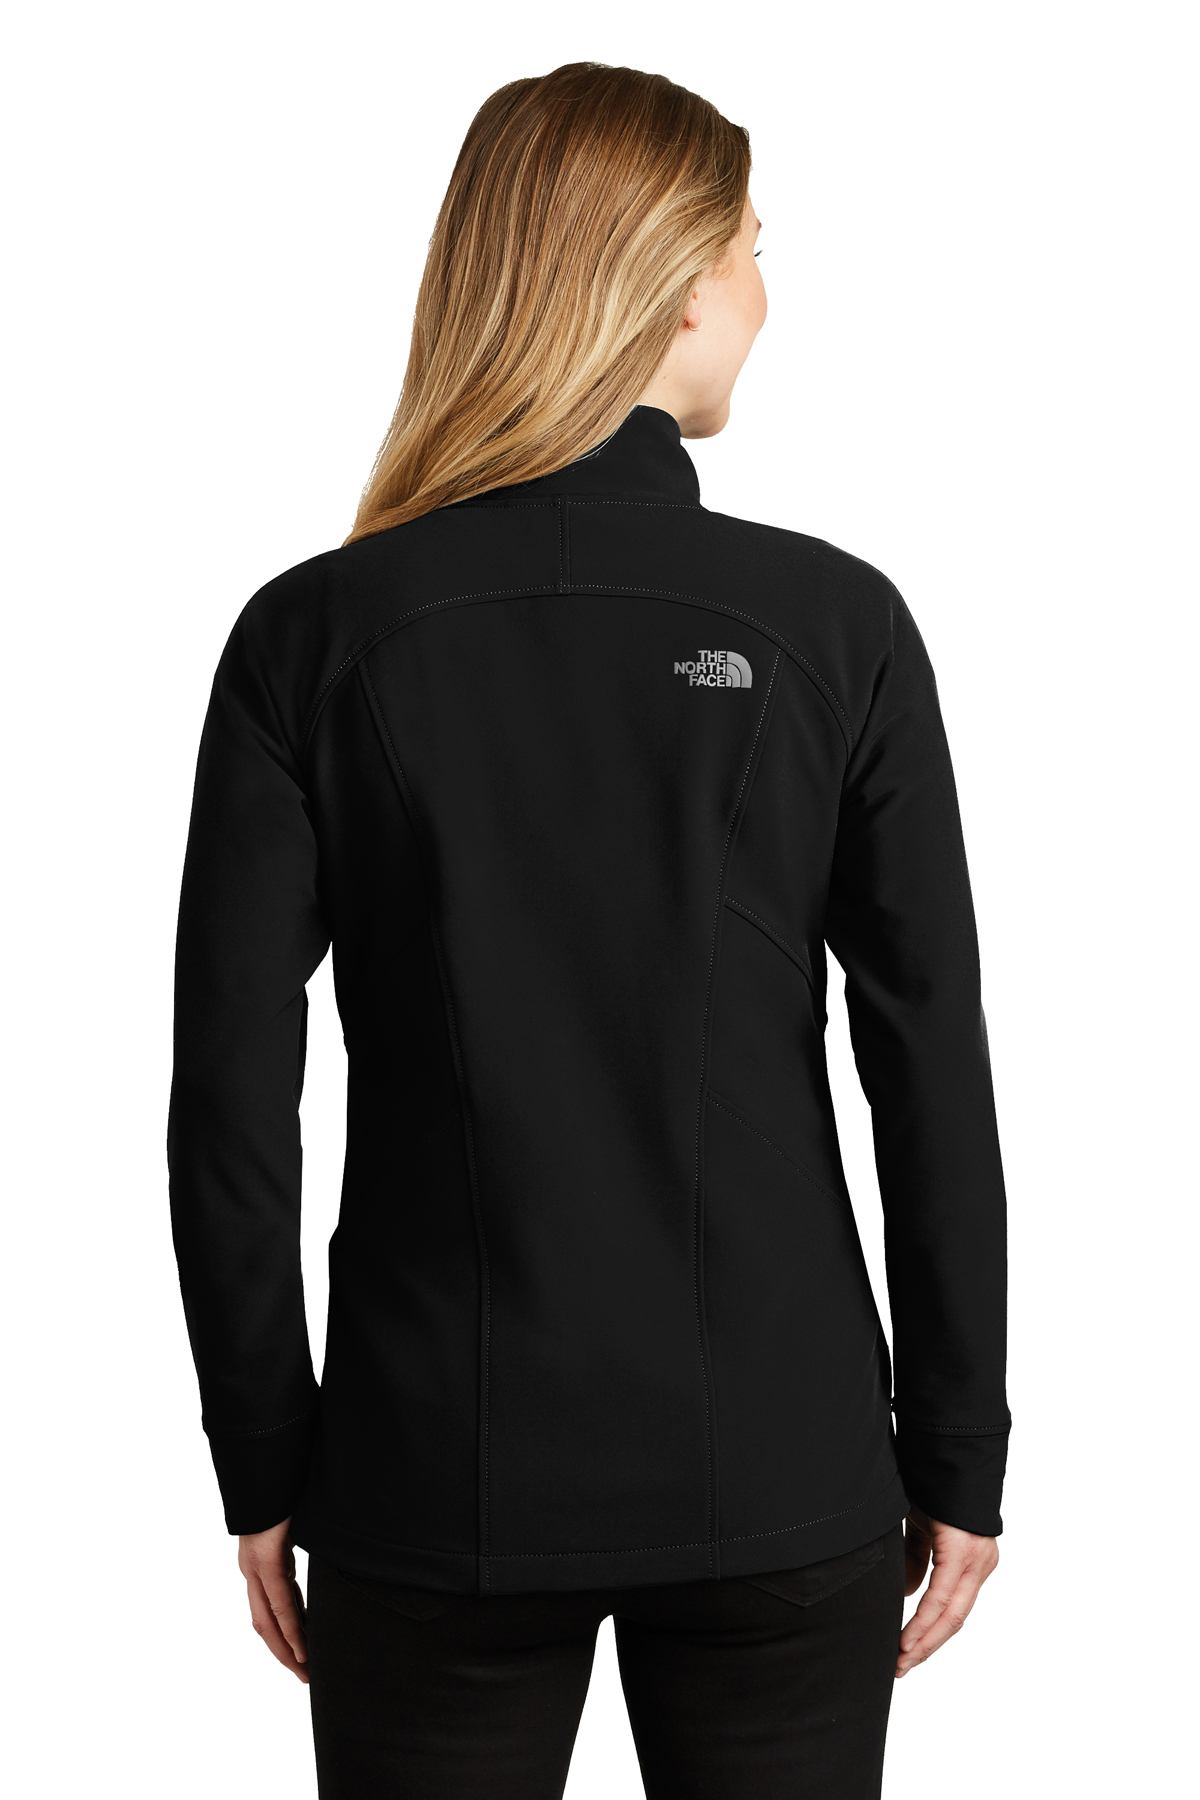 The North Face ® Ladies Tech Stretch Soft Shell Jacket | Product | SanMar